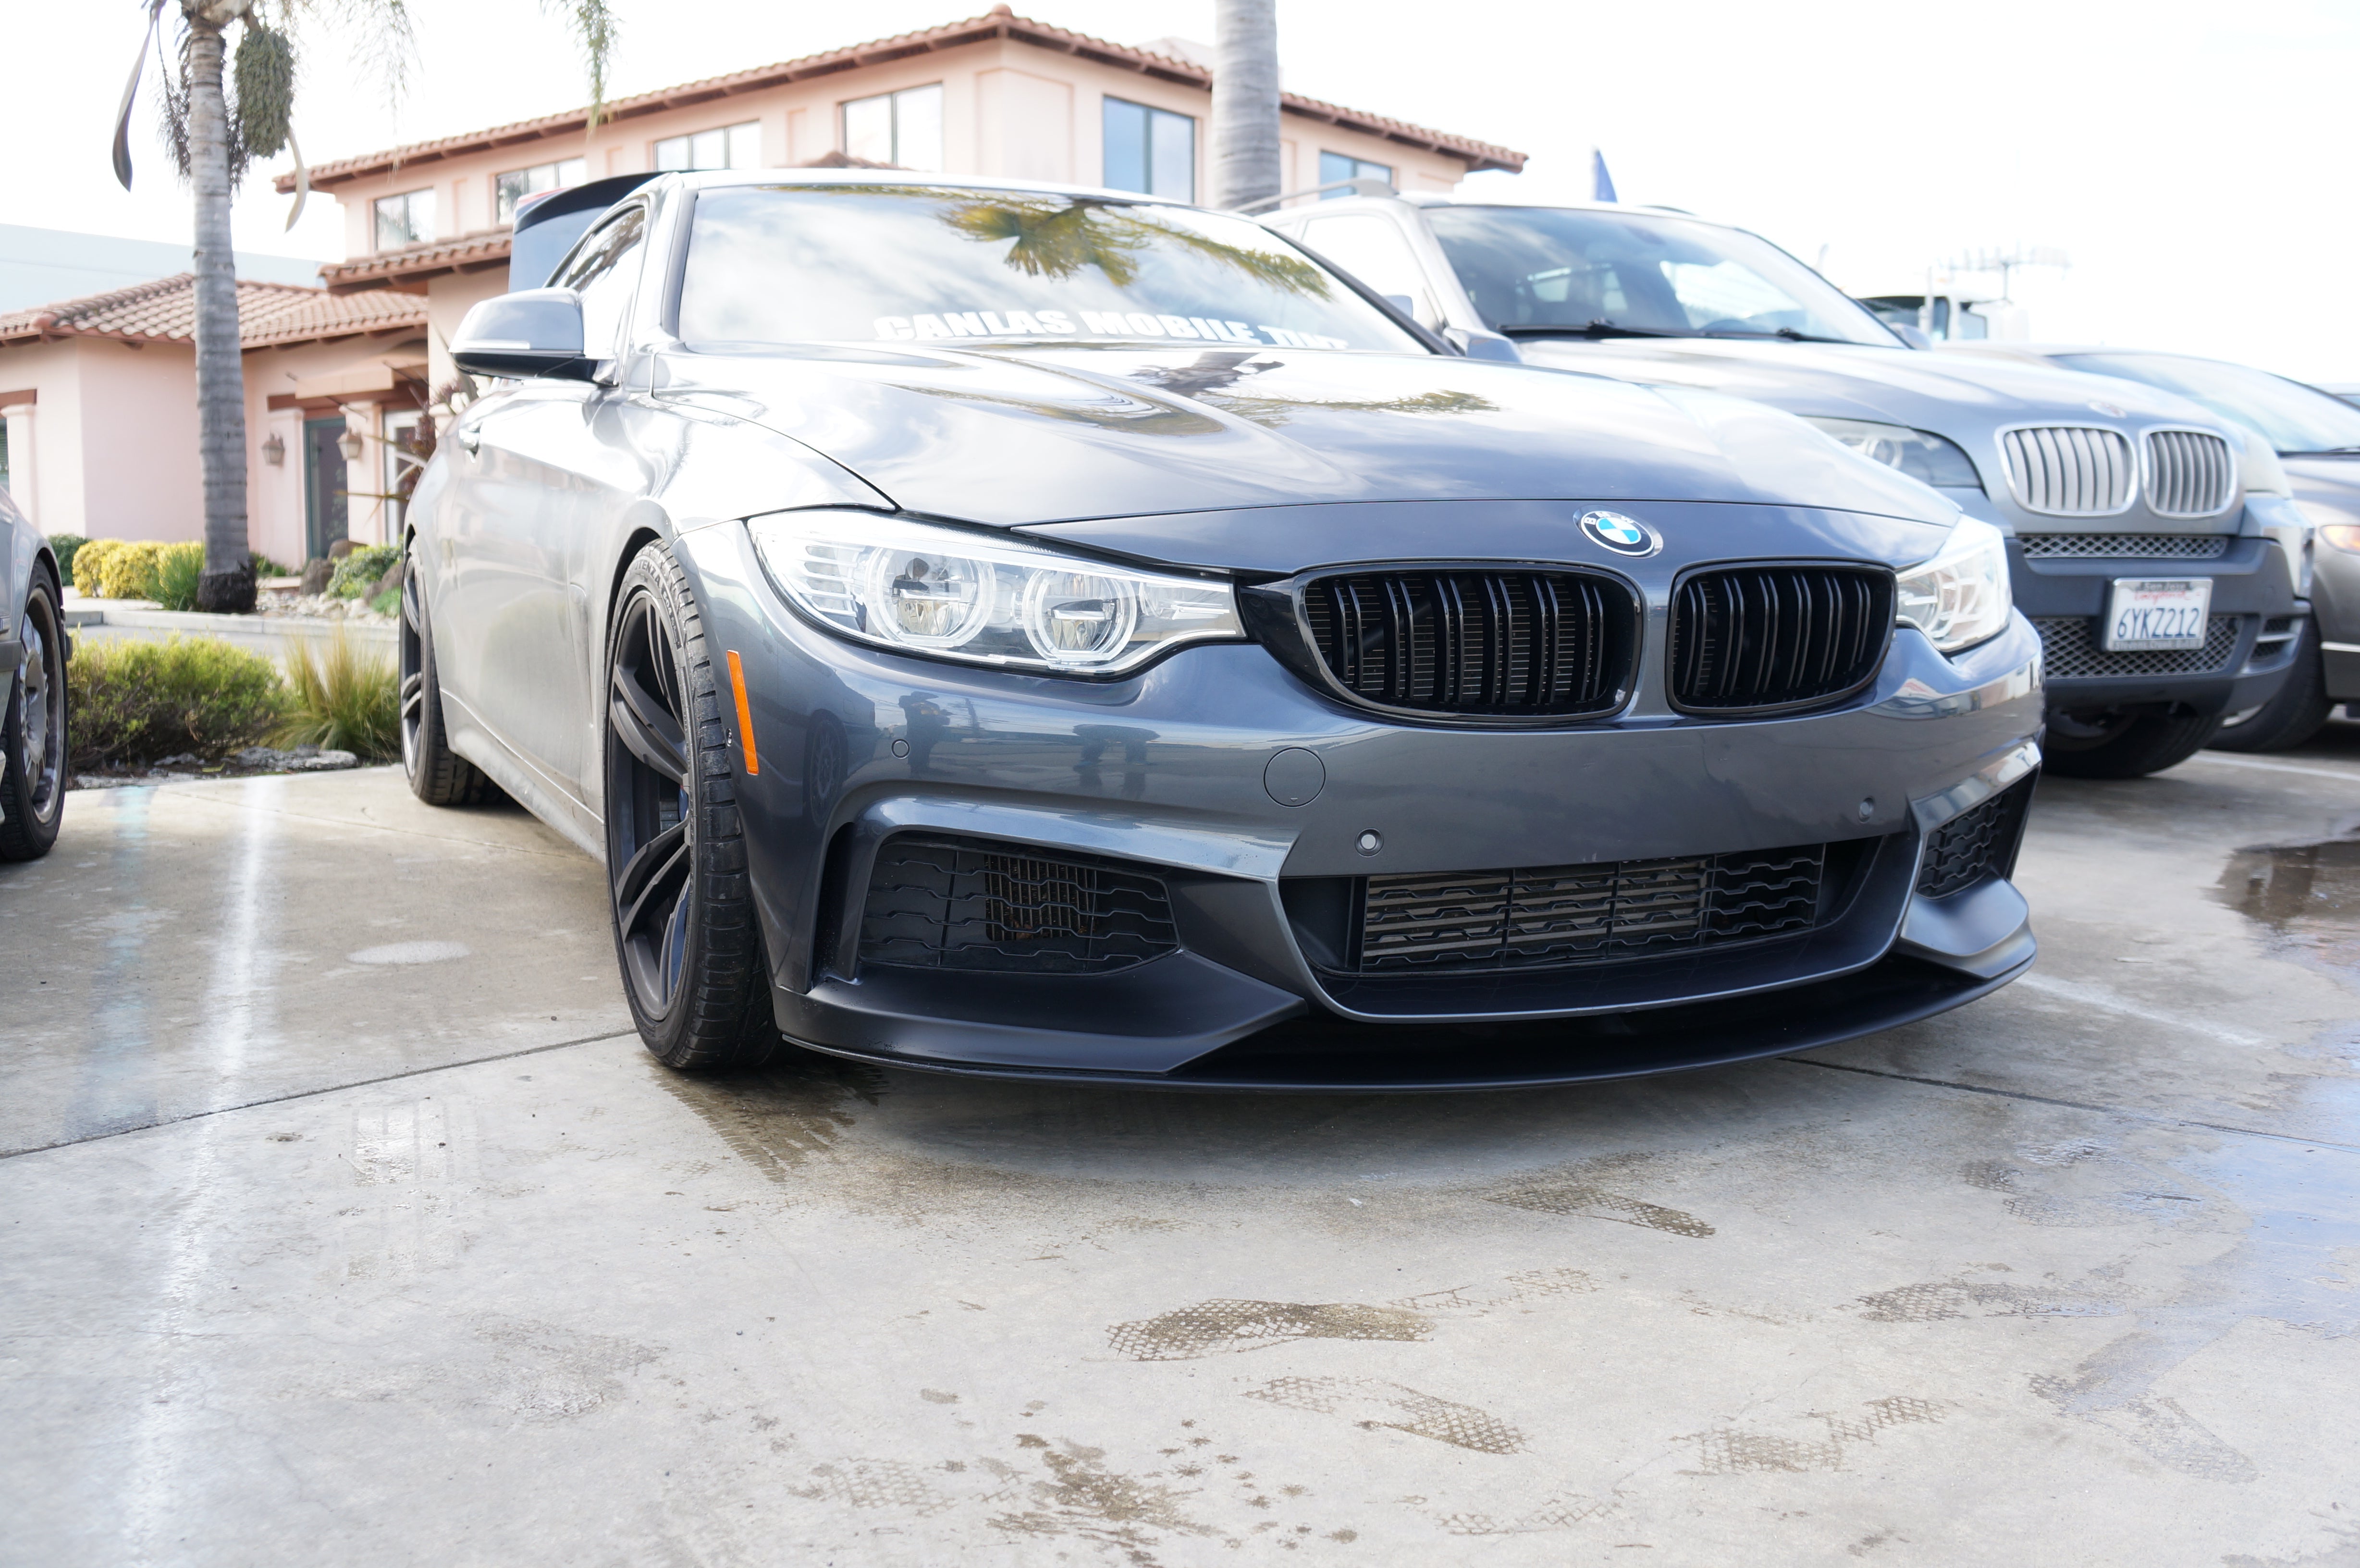 Zero Offset  M Performance Style Front Lip for BMW 4 Series (F32) 13-18 - MODE Auto Concepts